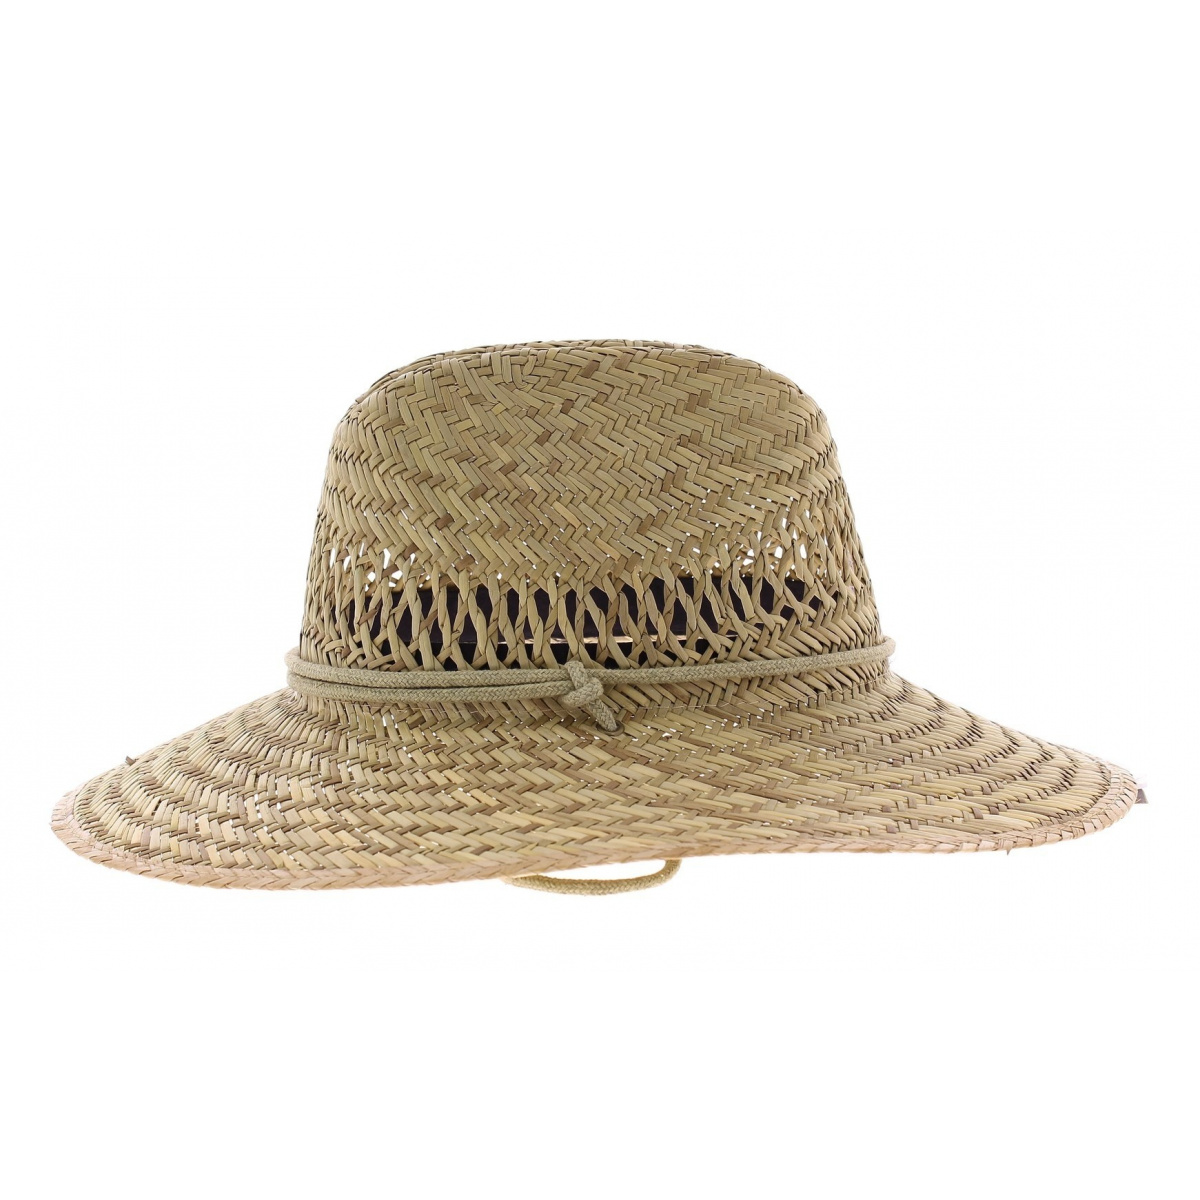 garden hat - straw hat purchase Reference : 4591